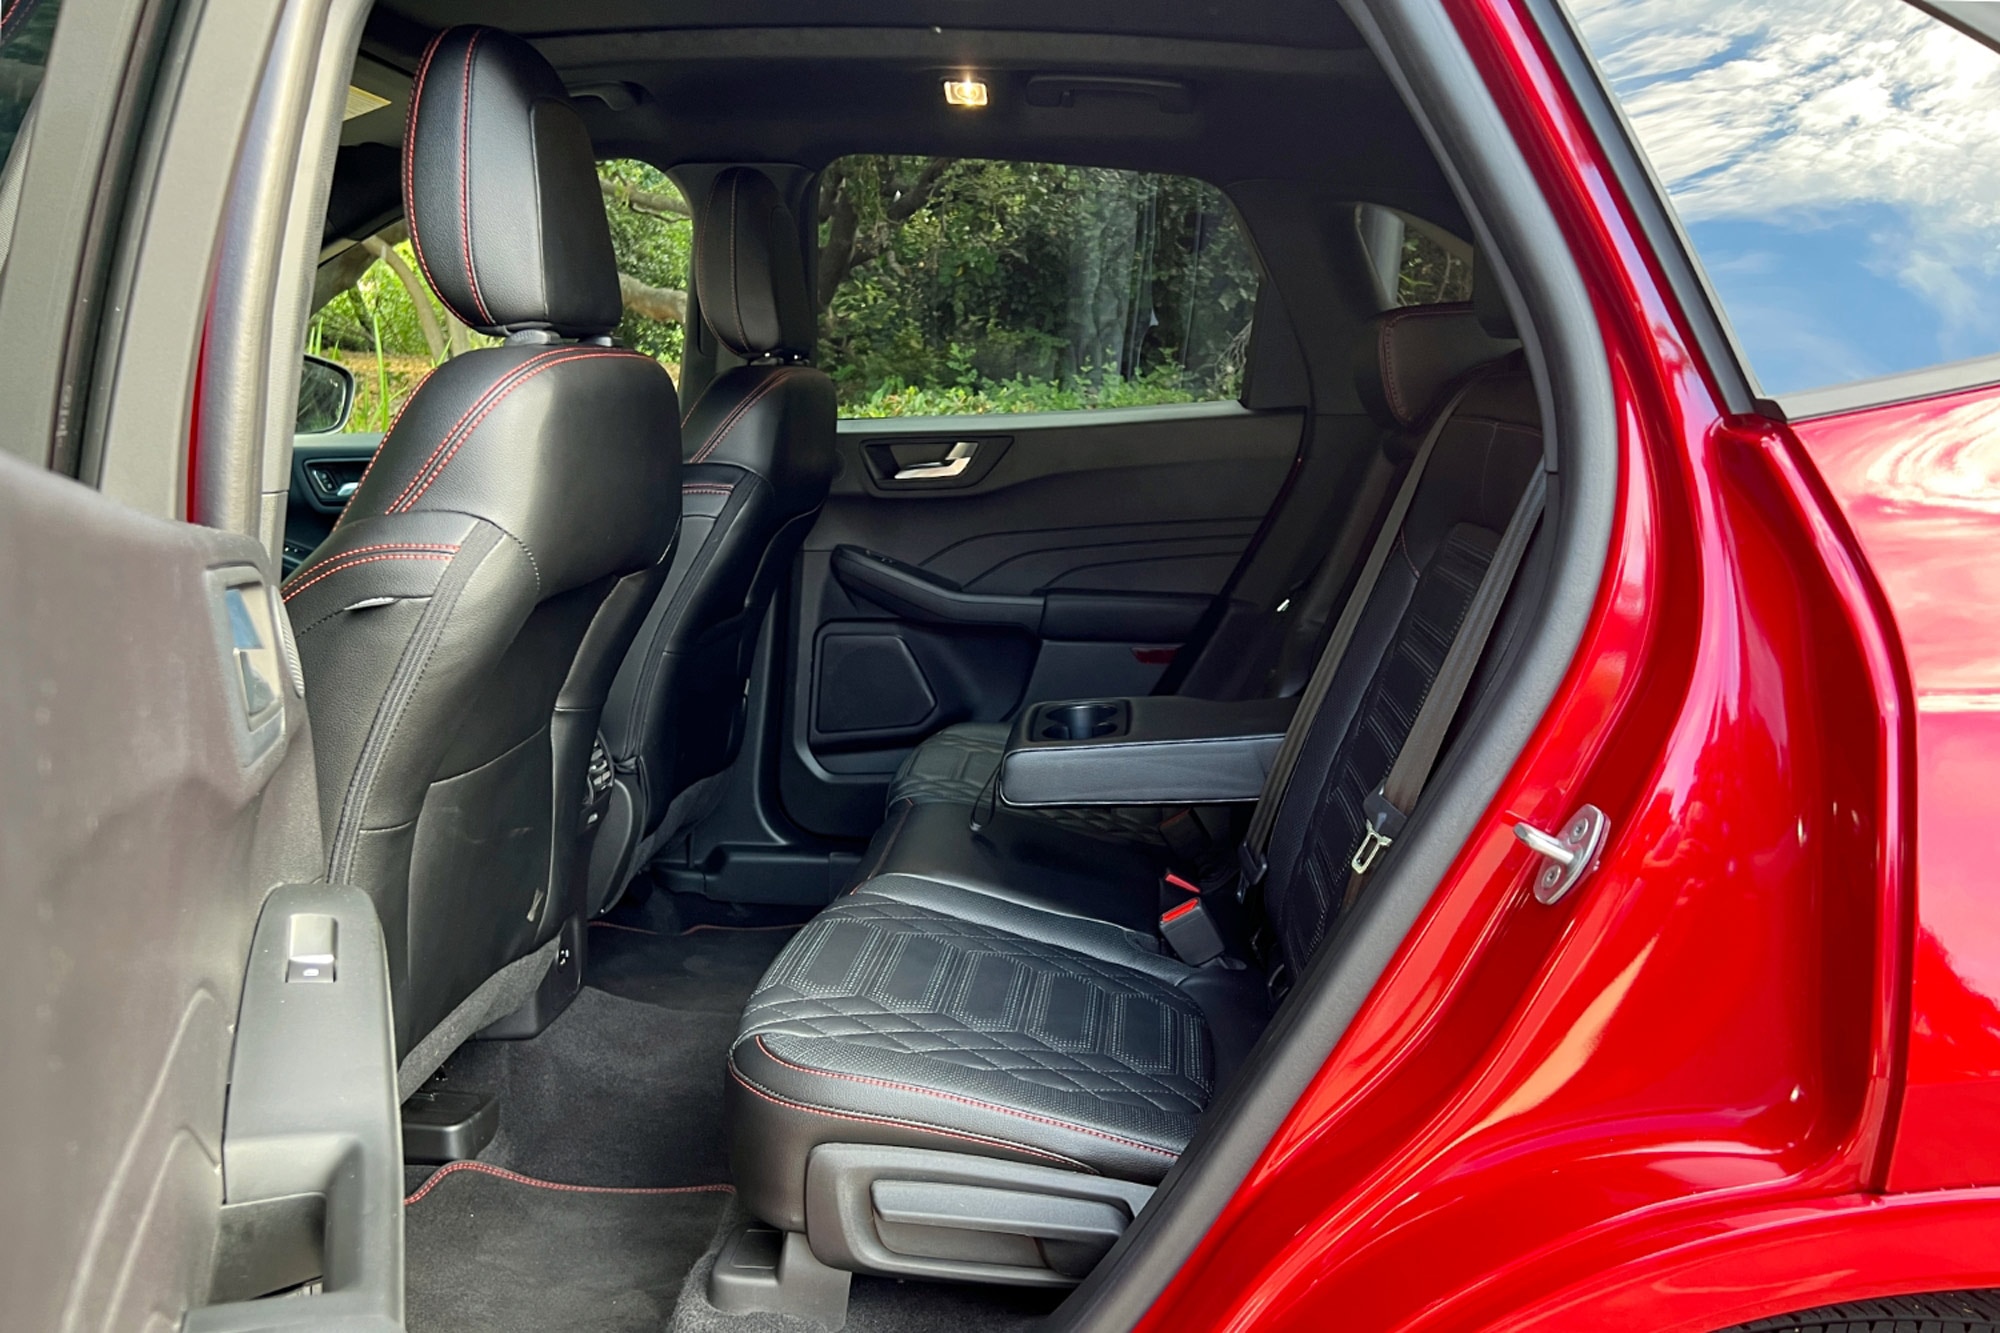 2023 Ford Escape ST-Line Elite in Rapid Red rear passenger seats with window view of forest